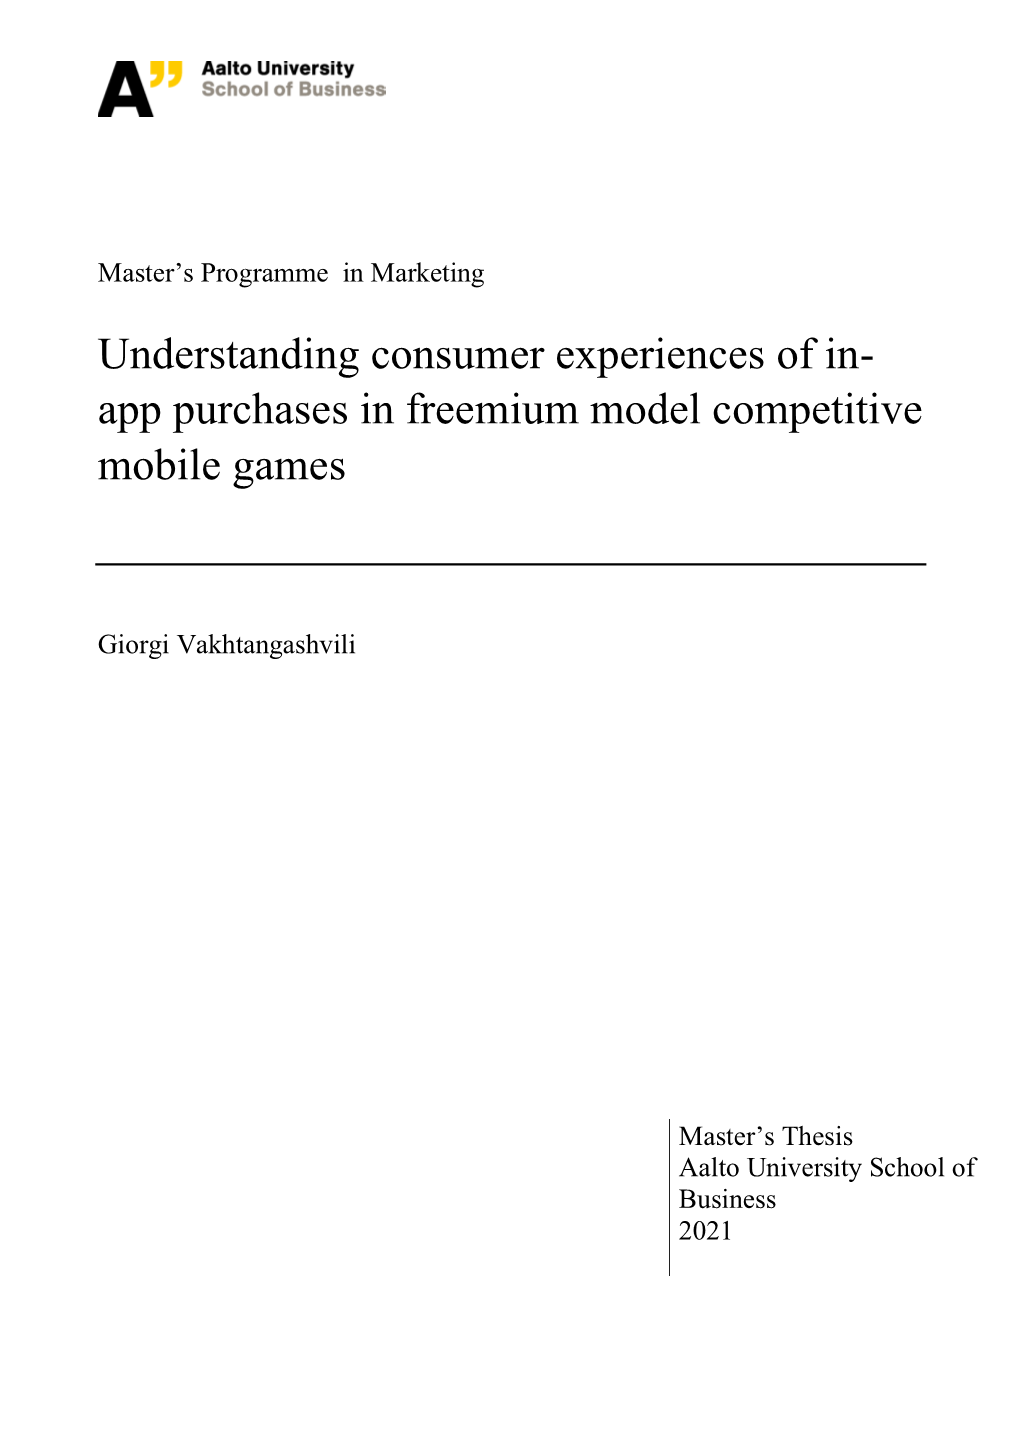 Understanding Consumer Experiences of In- App Purchases in Freemium Model Competitive Mobile Games